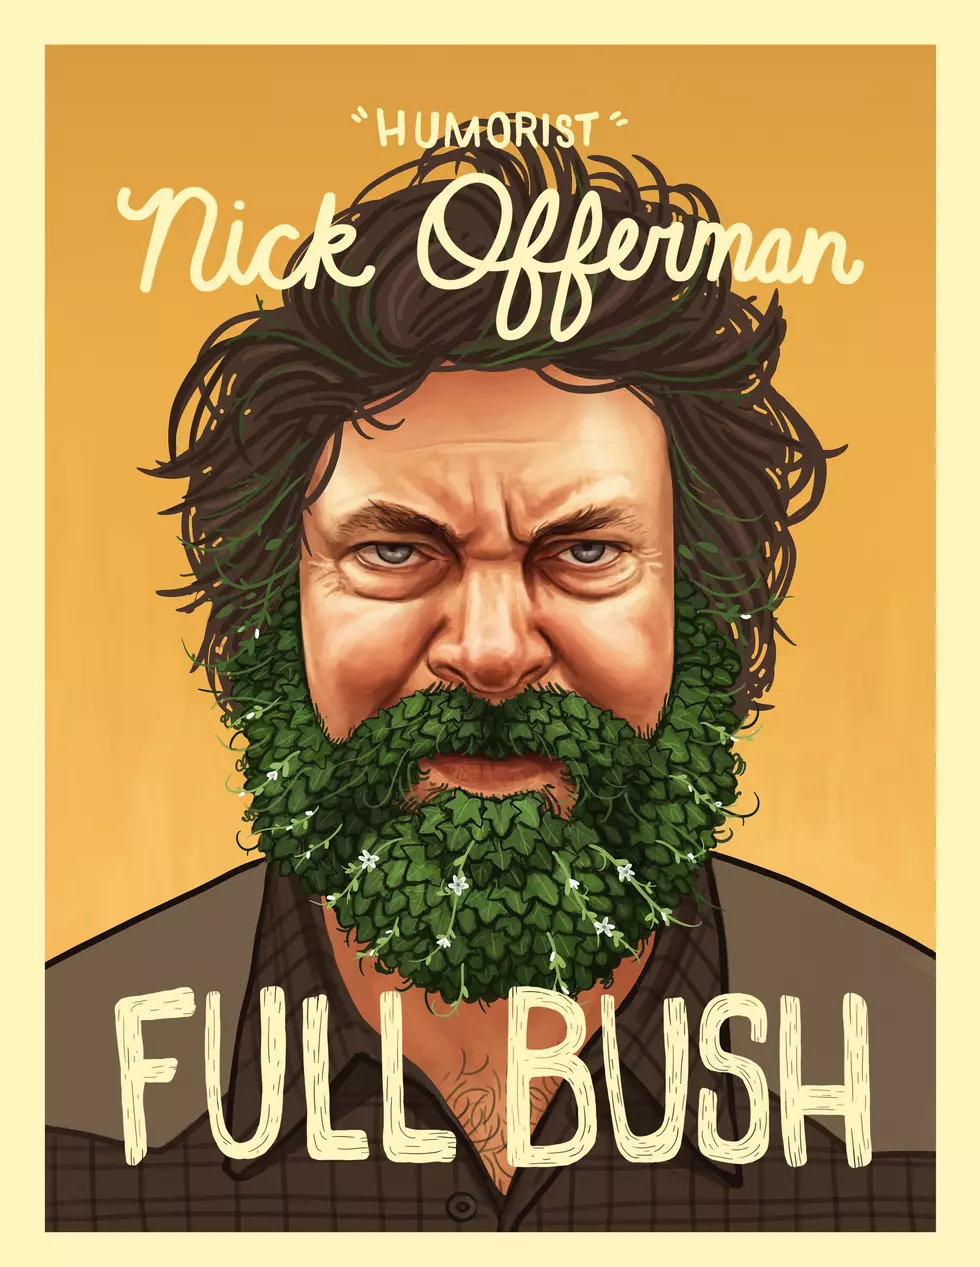 Nick Offerman to Perform in Portland